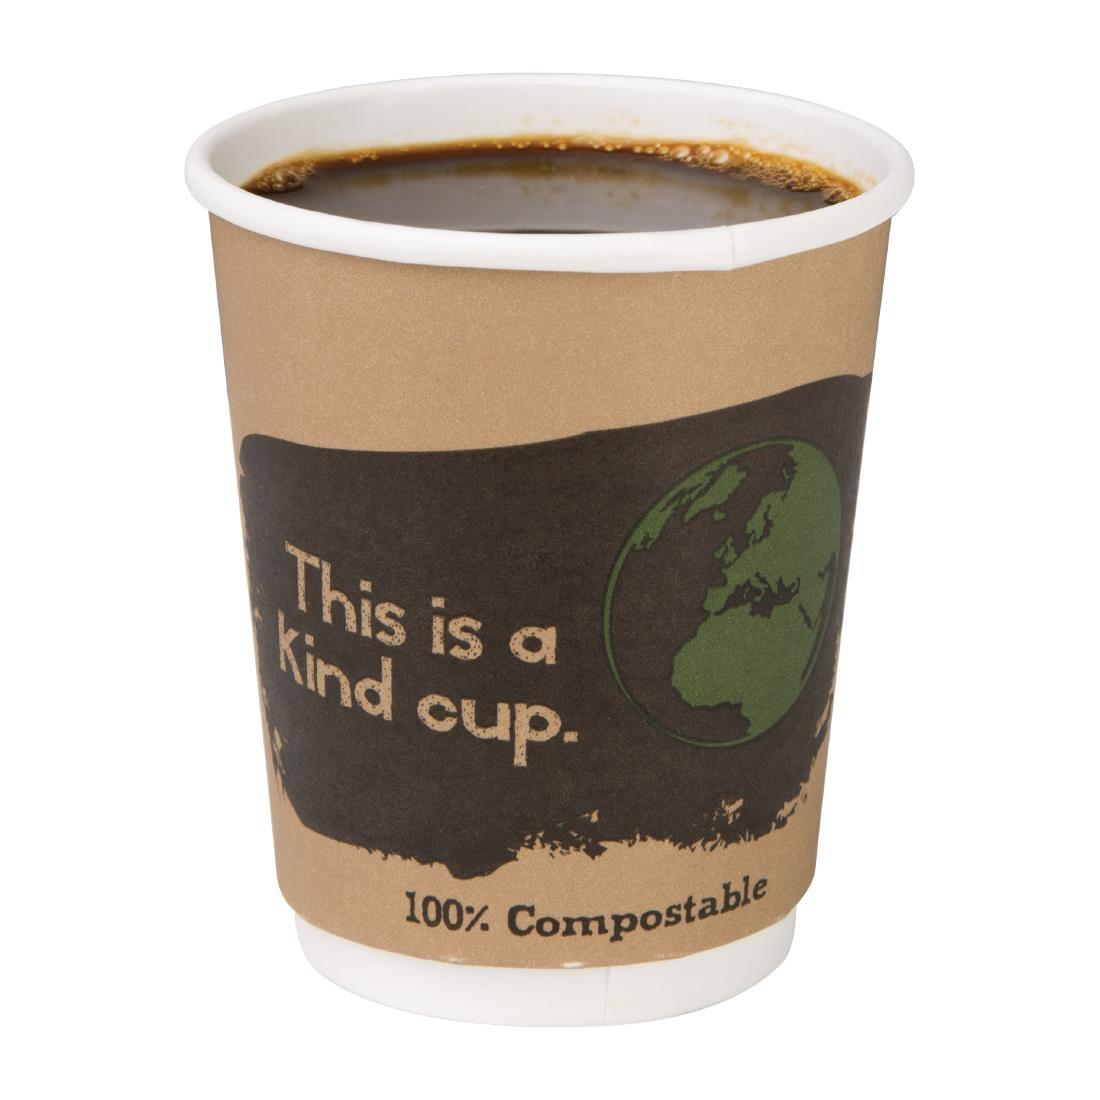 Fiesta Compostable Coffee Cups Double Wall 227ml / 8oz (Pack of 500) - DY985  - 3